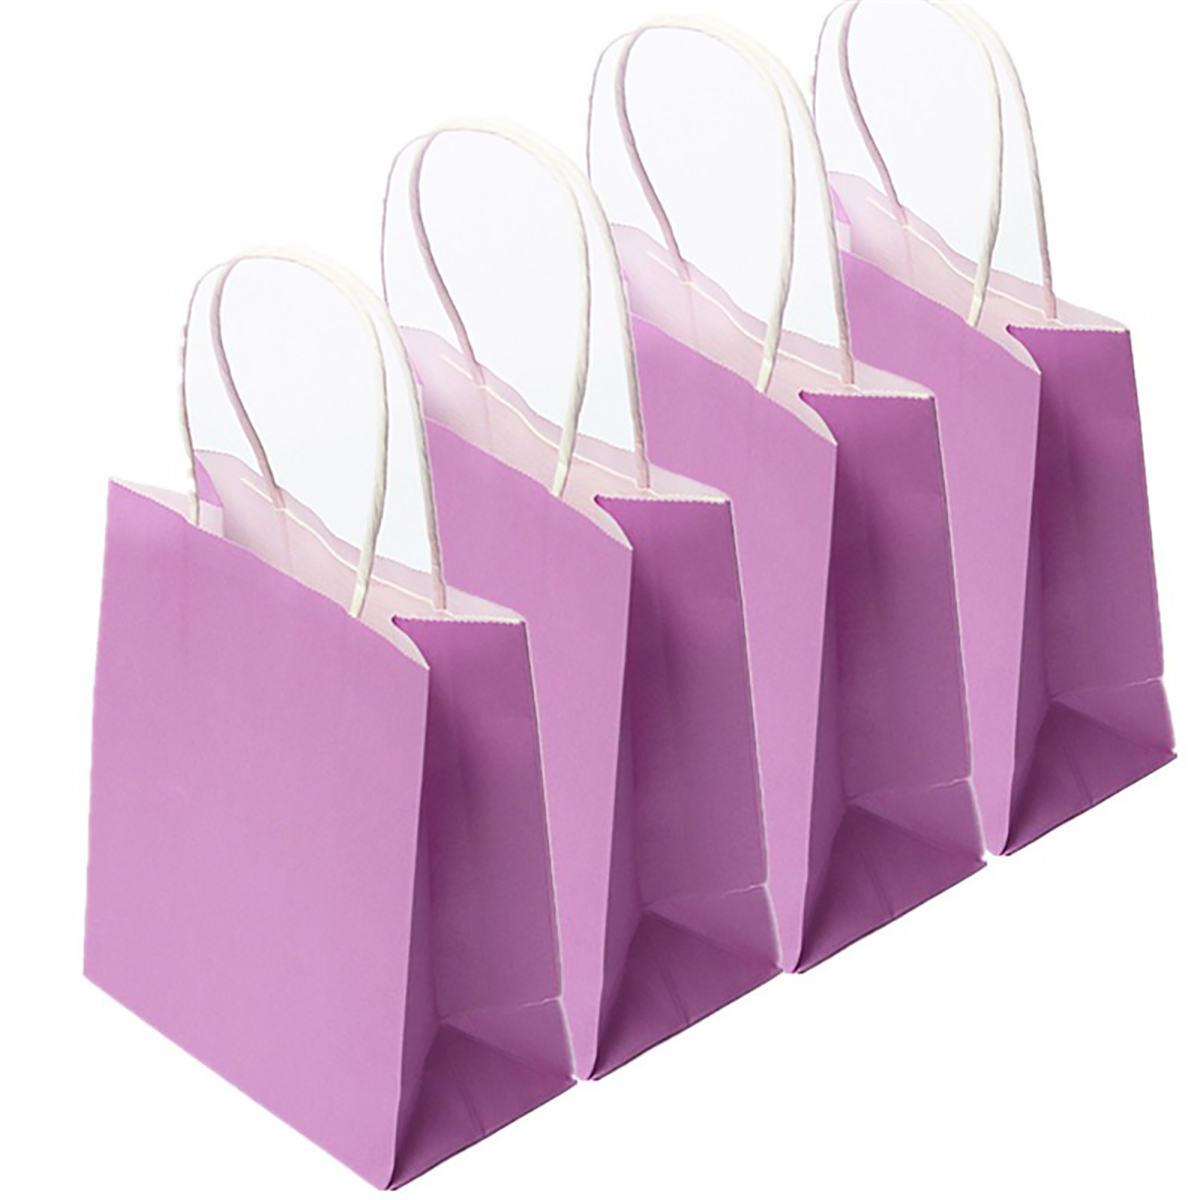 Colorful-Kraft-Paper-Gift-Bag-Wedding-Party-Handle-Paper-Gift-Bags-987091-5